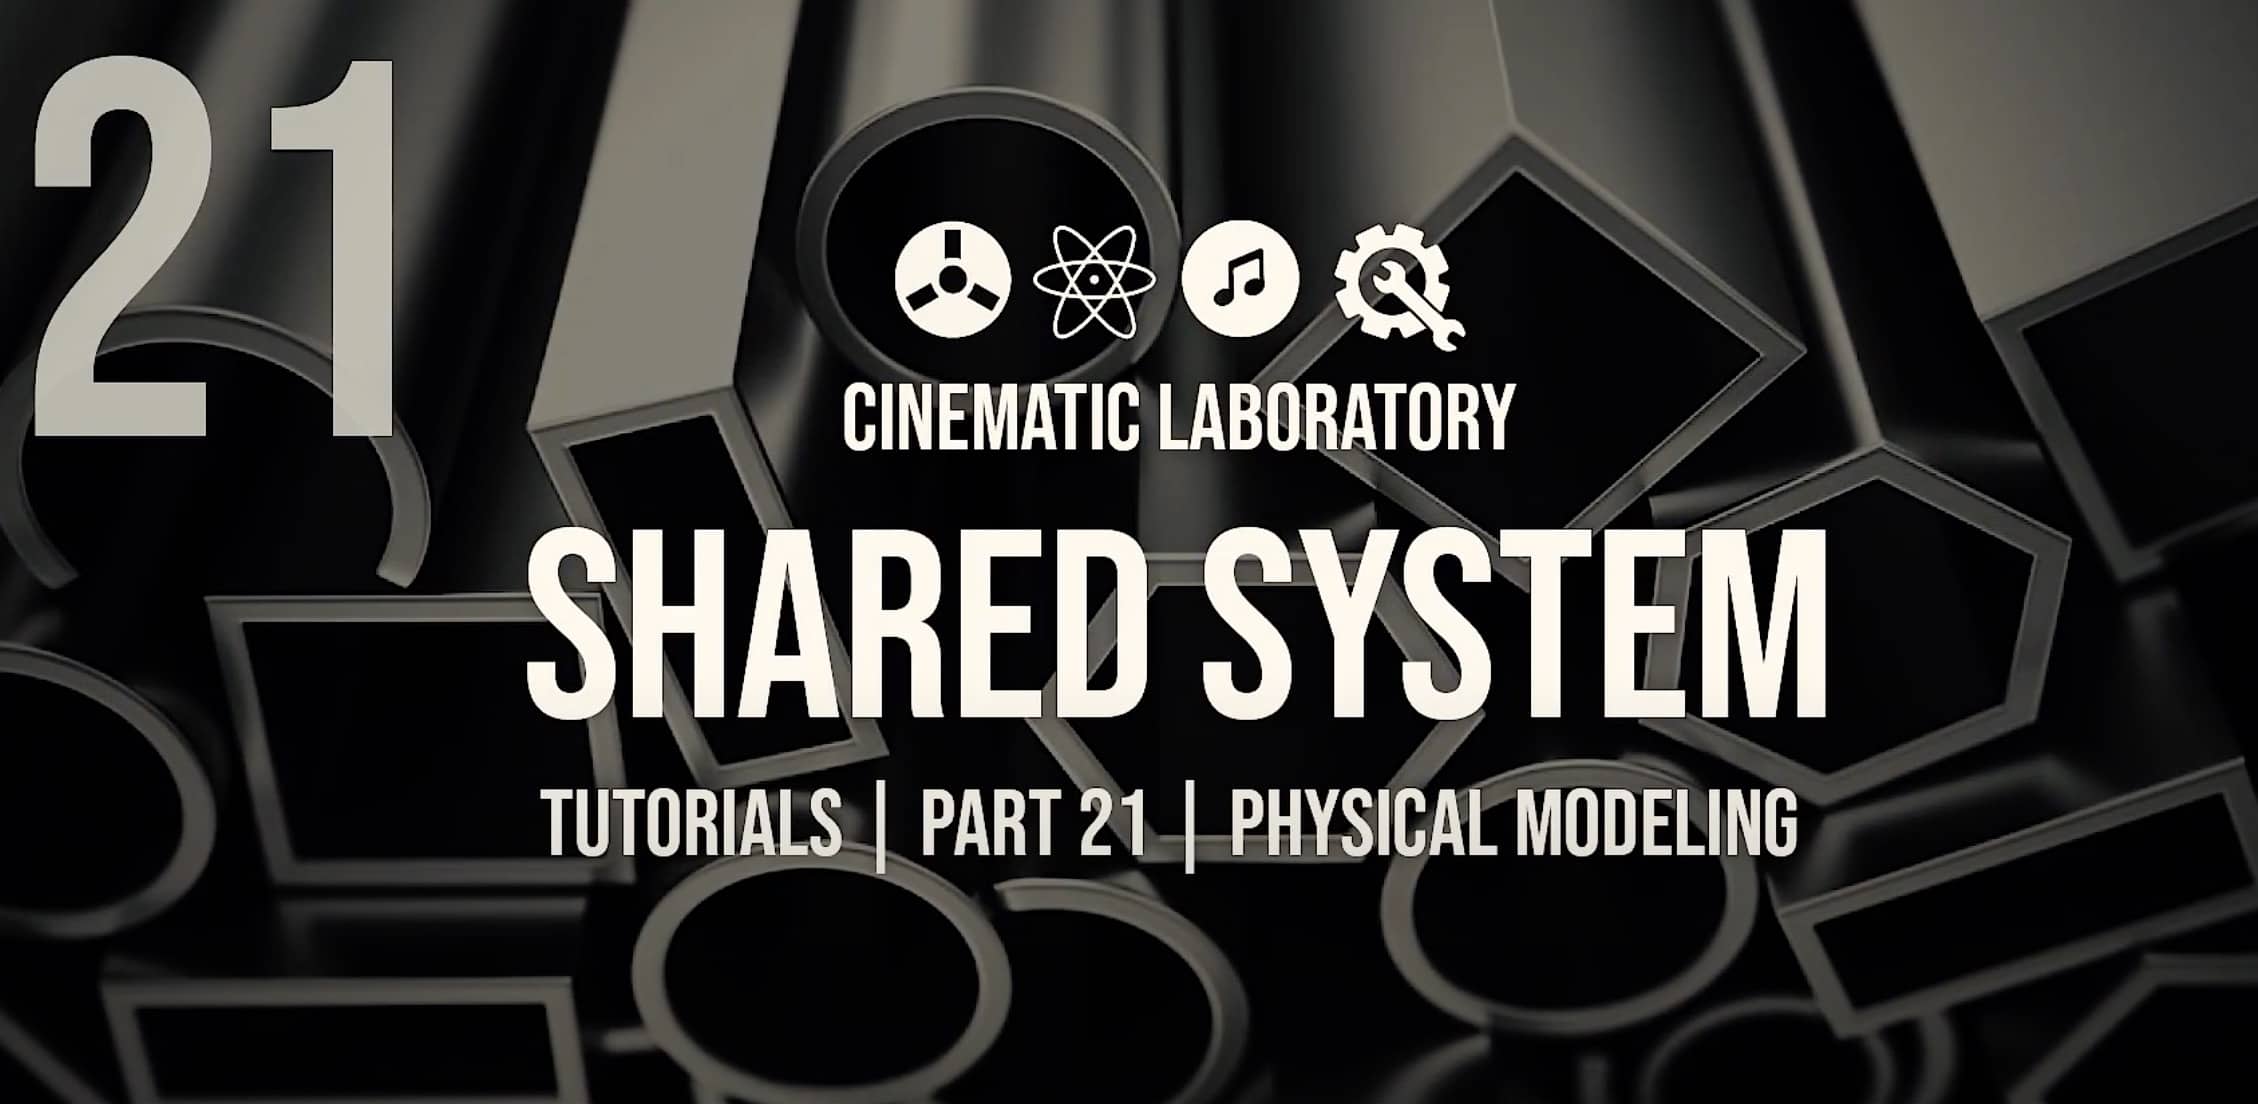 Shared System Tutorials | Part 21 - Physical Modeling